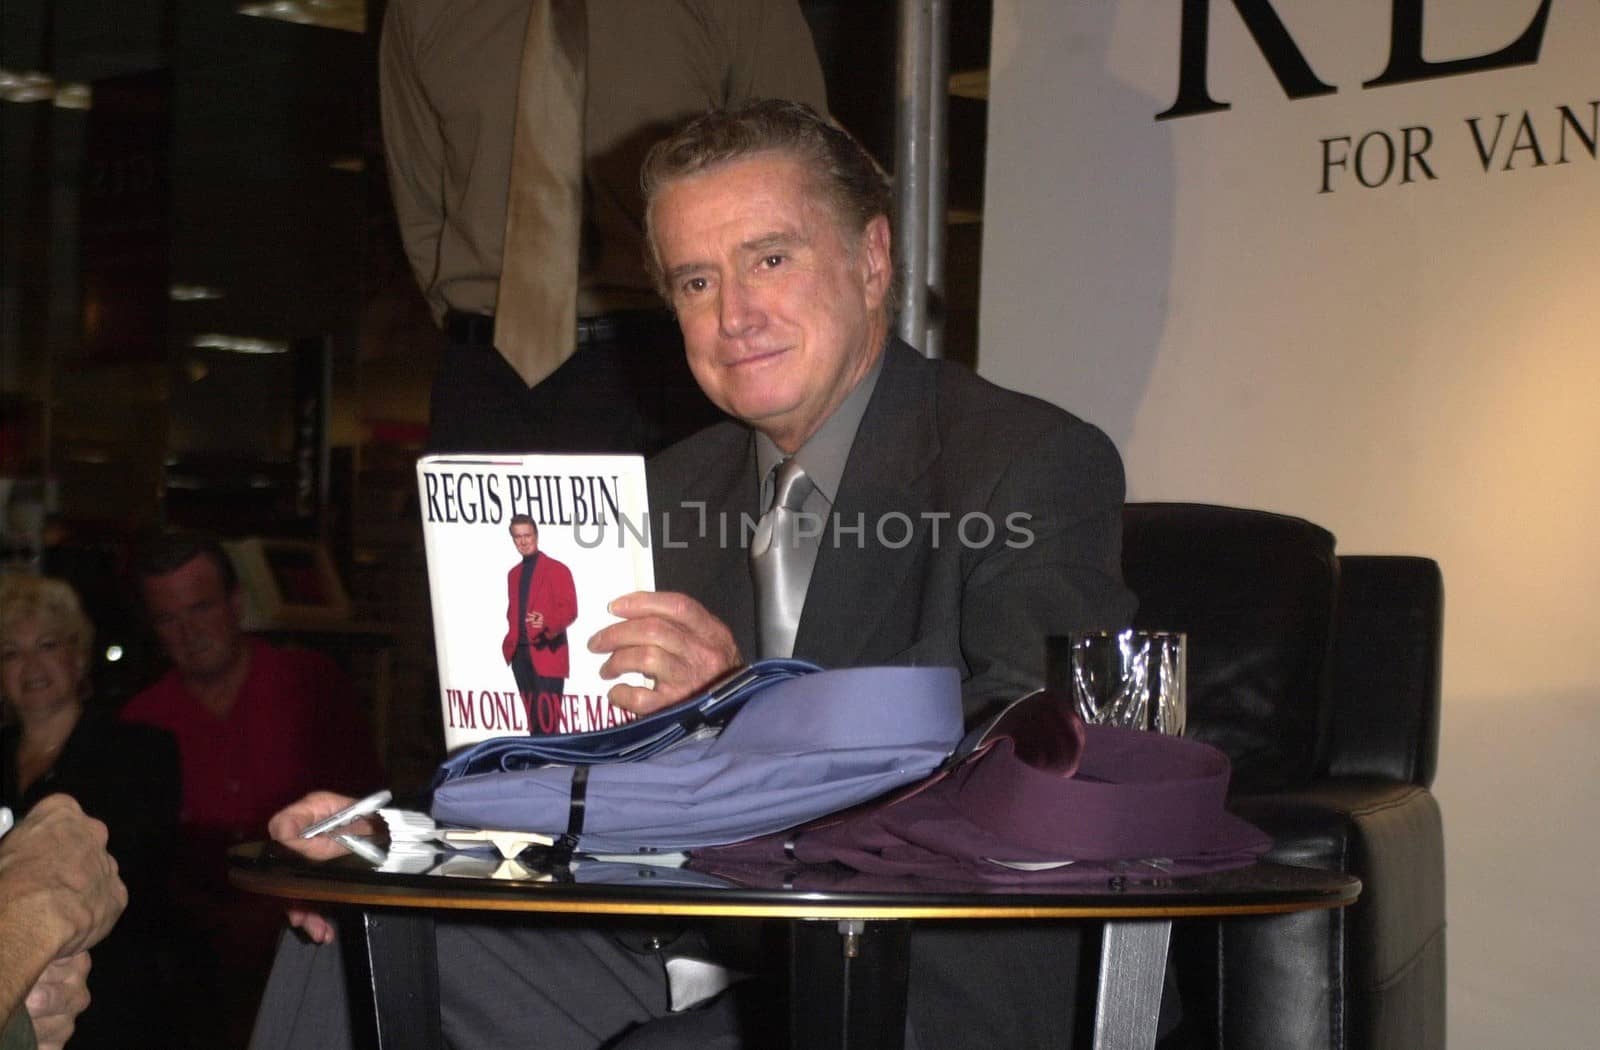 Regis Philbin Clothing Line by ImageCollect